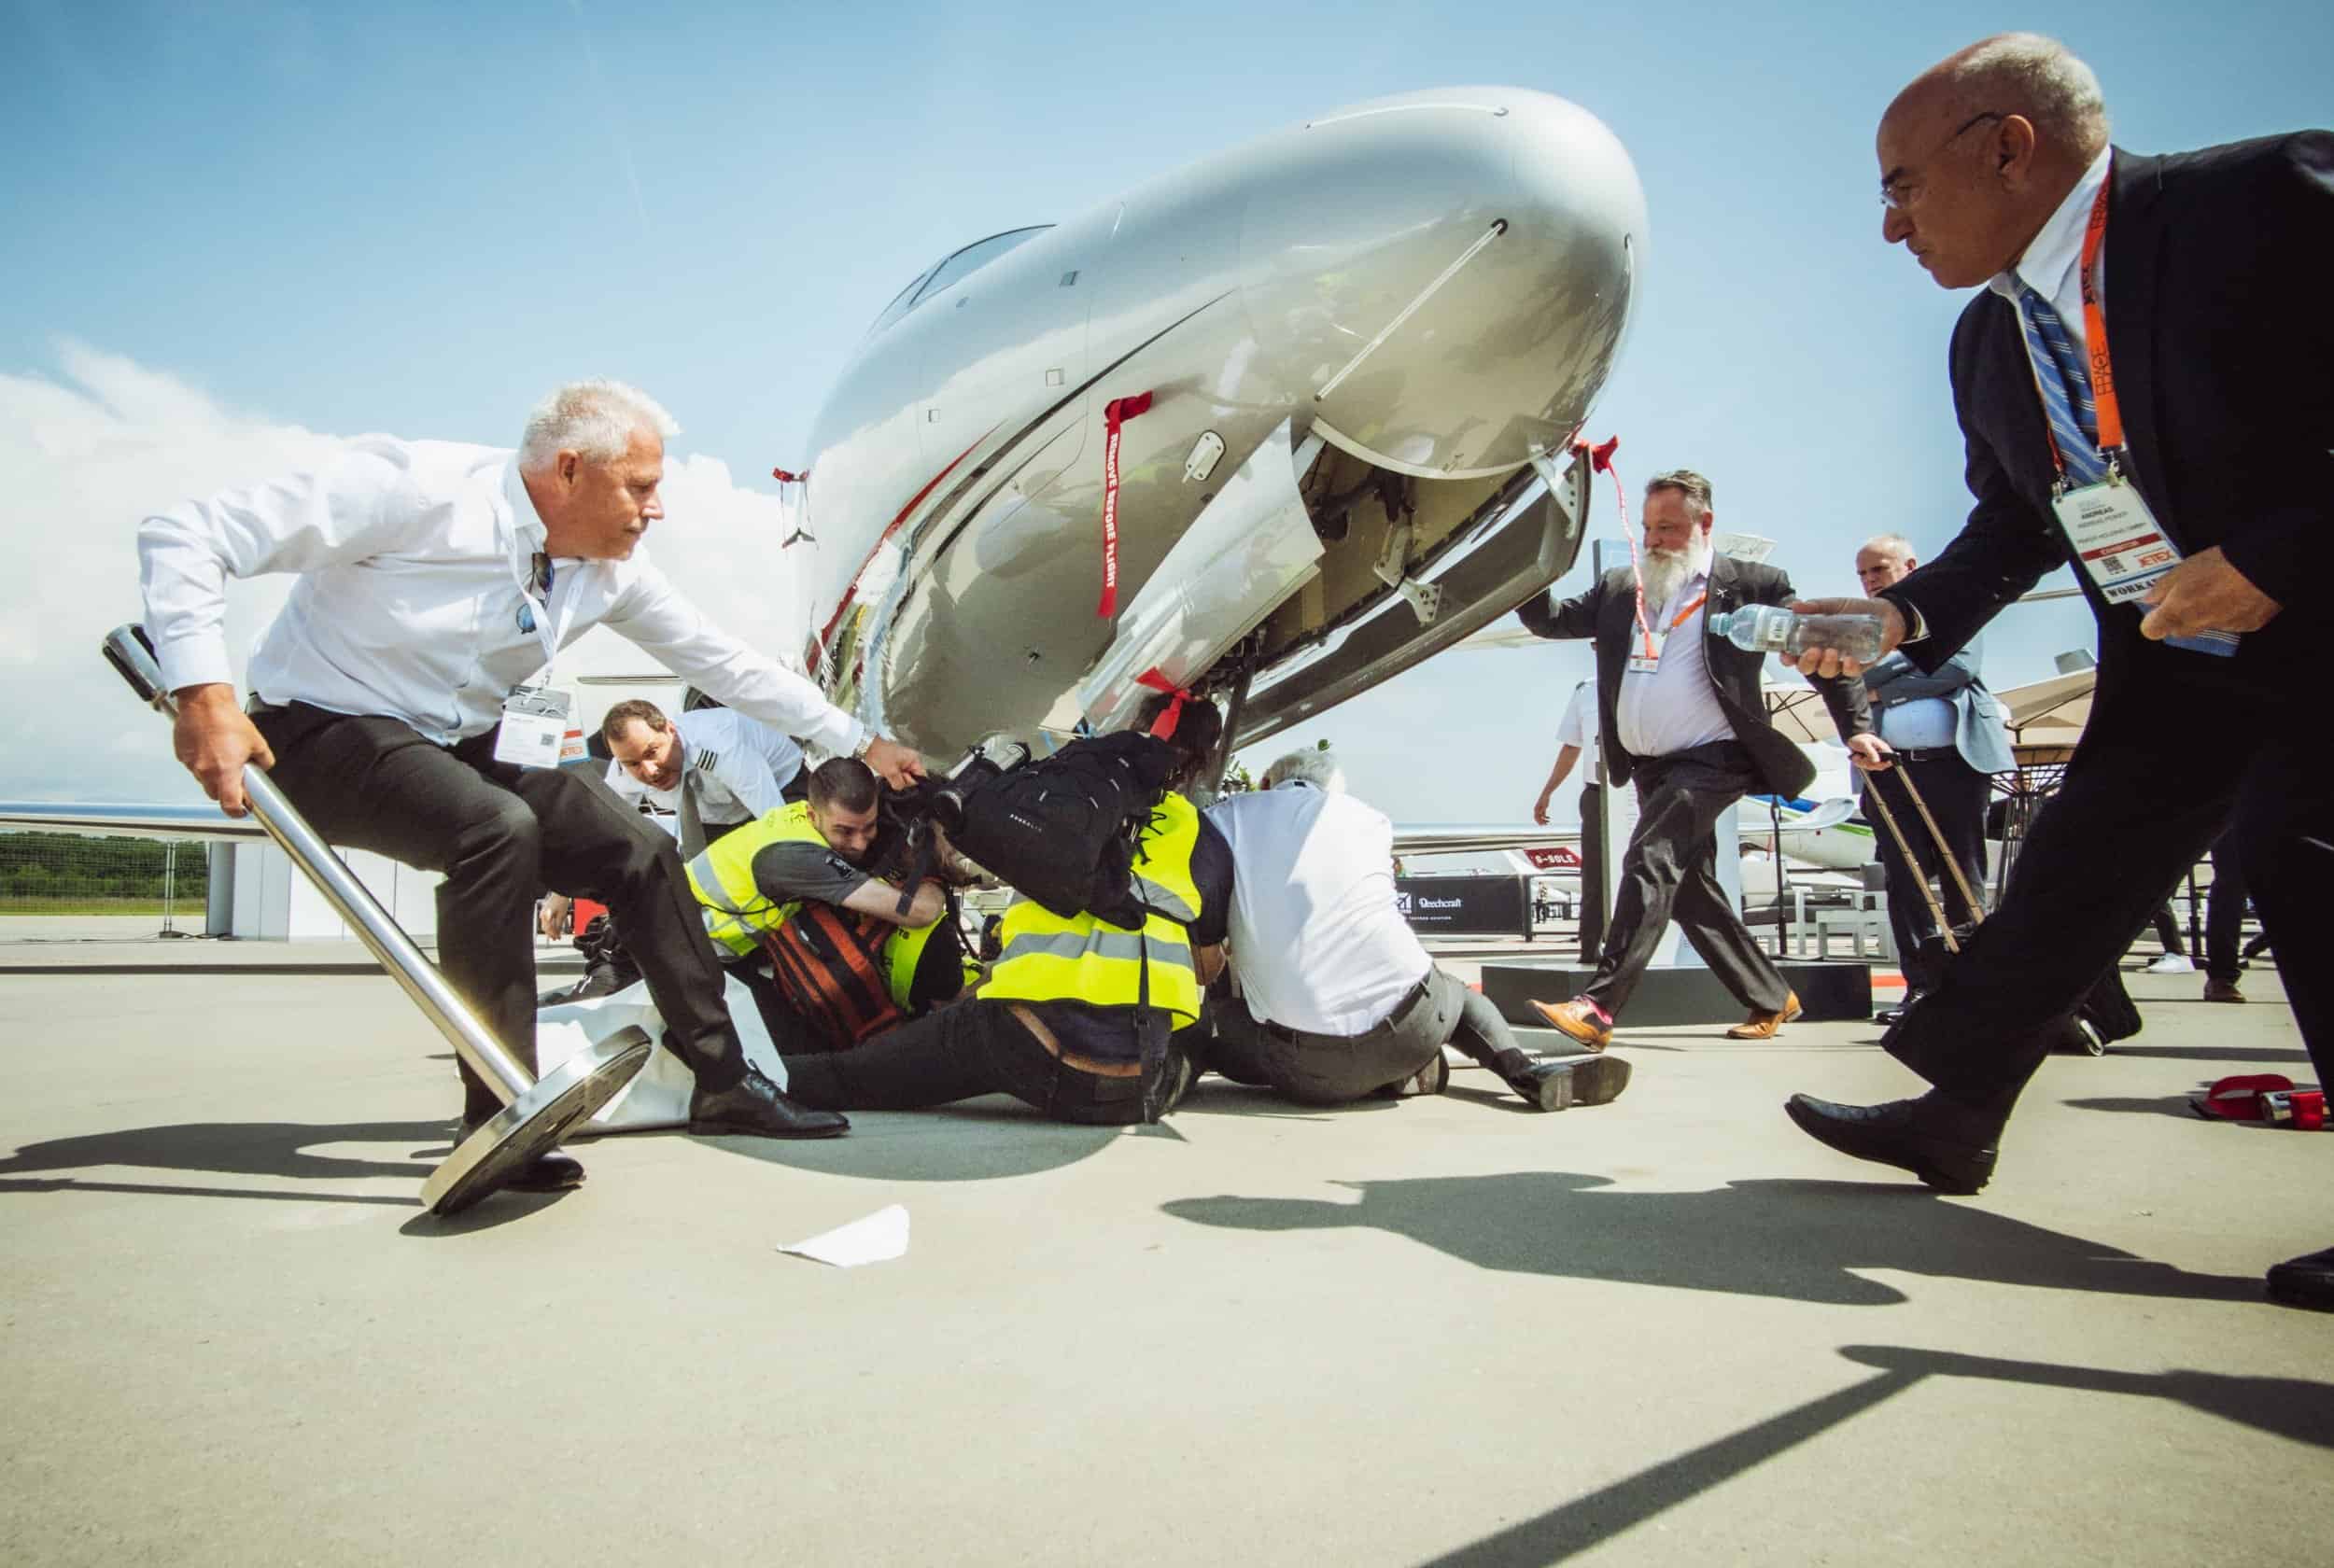 Security rush in to pull activists from the base of a private jet